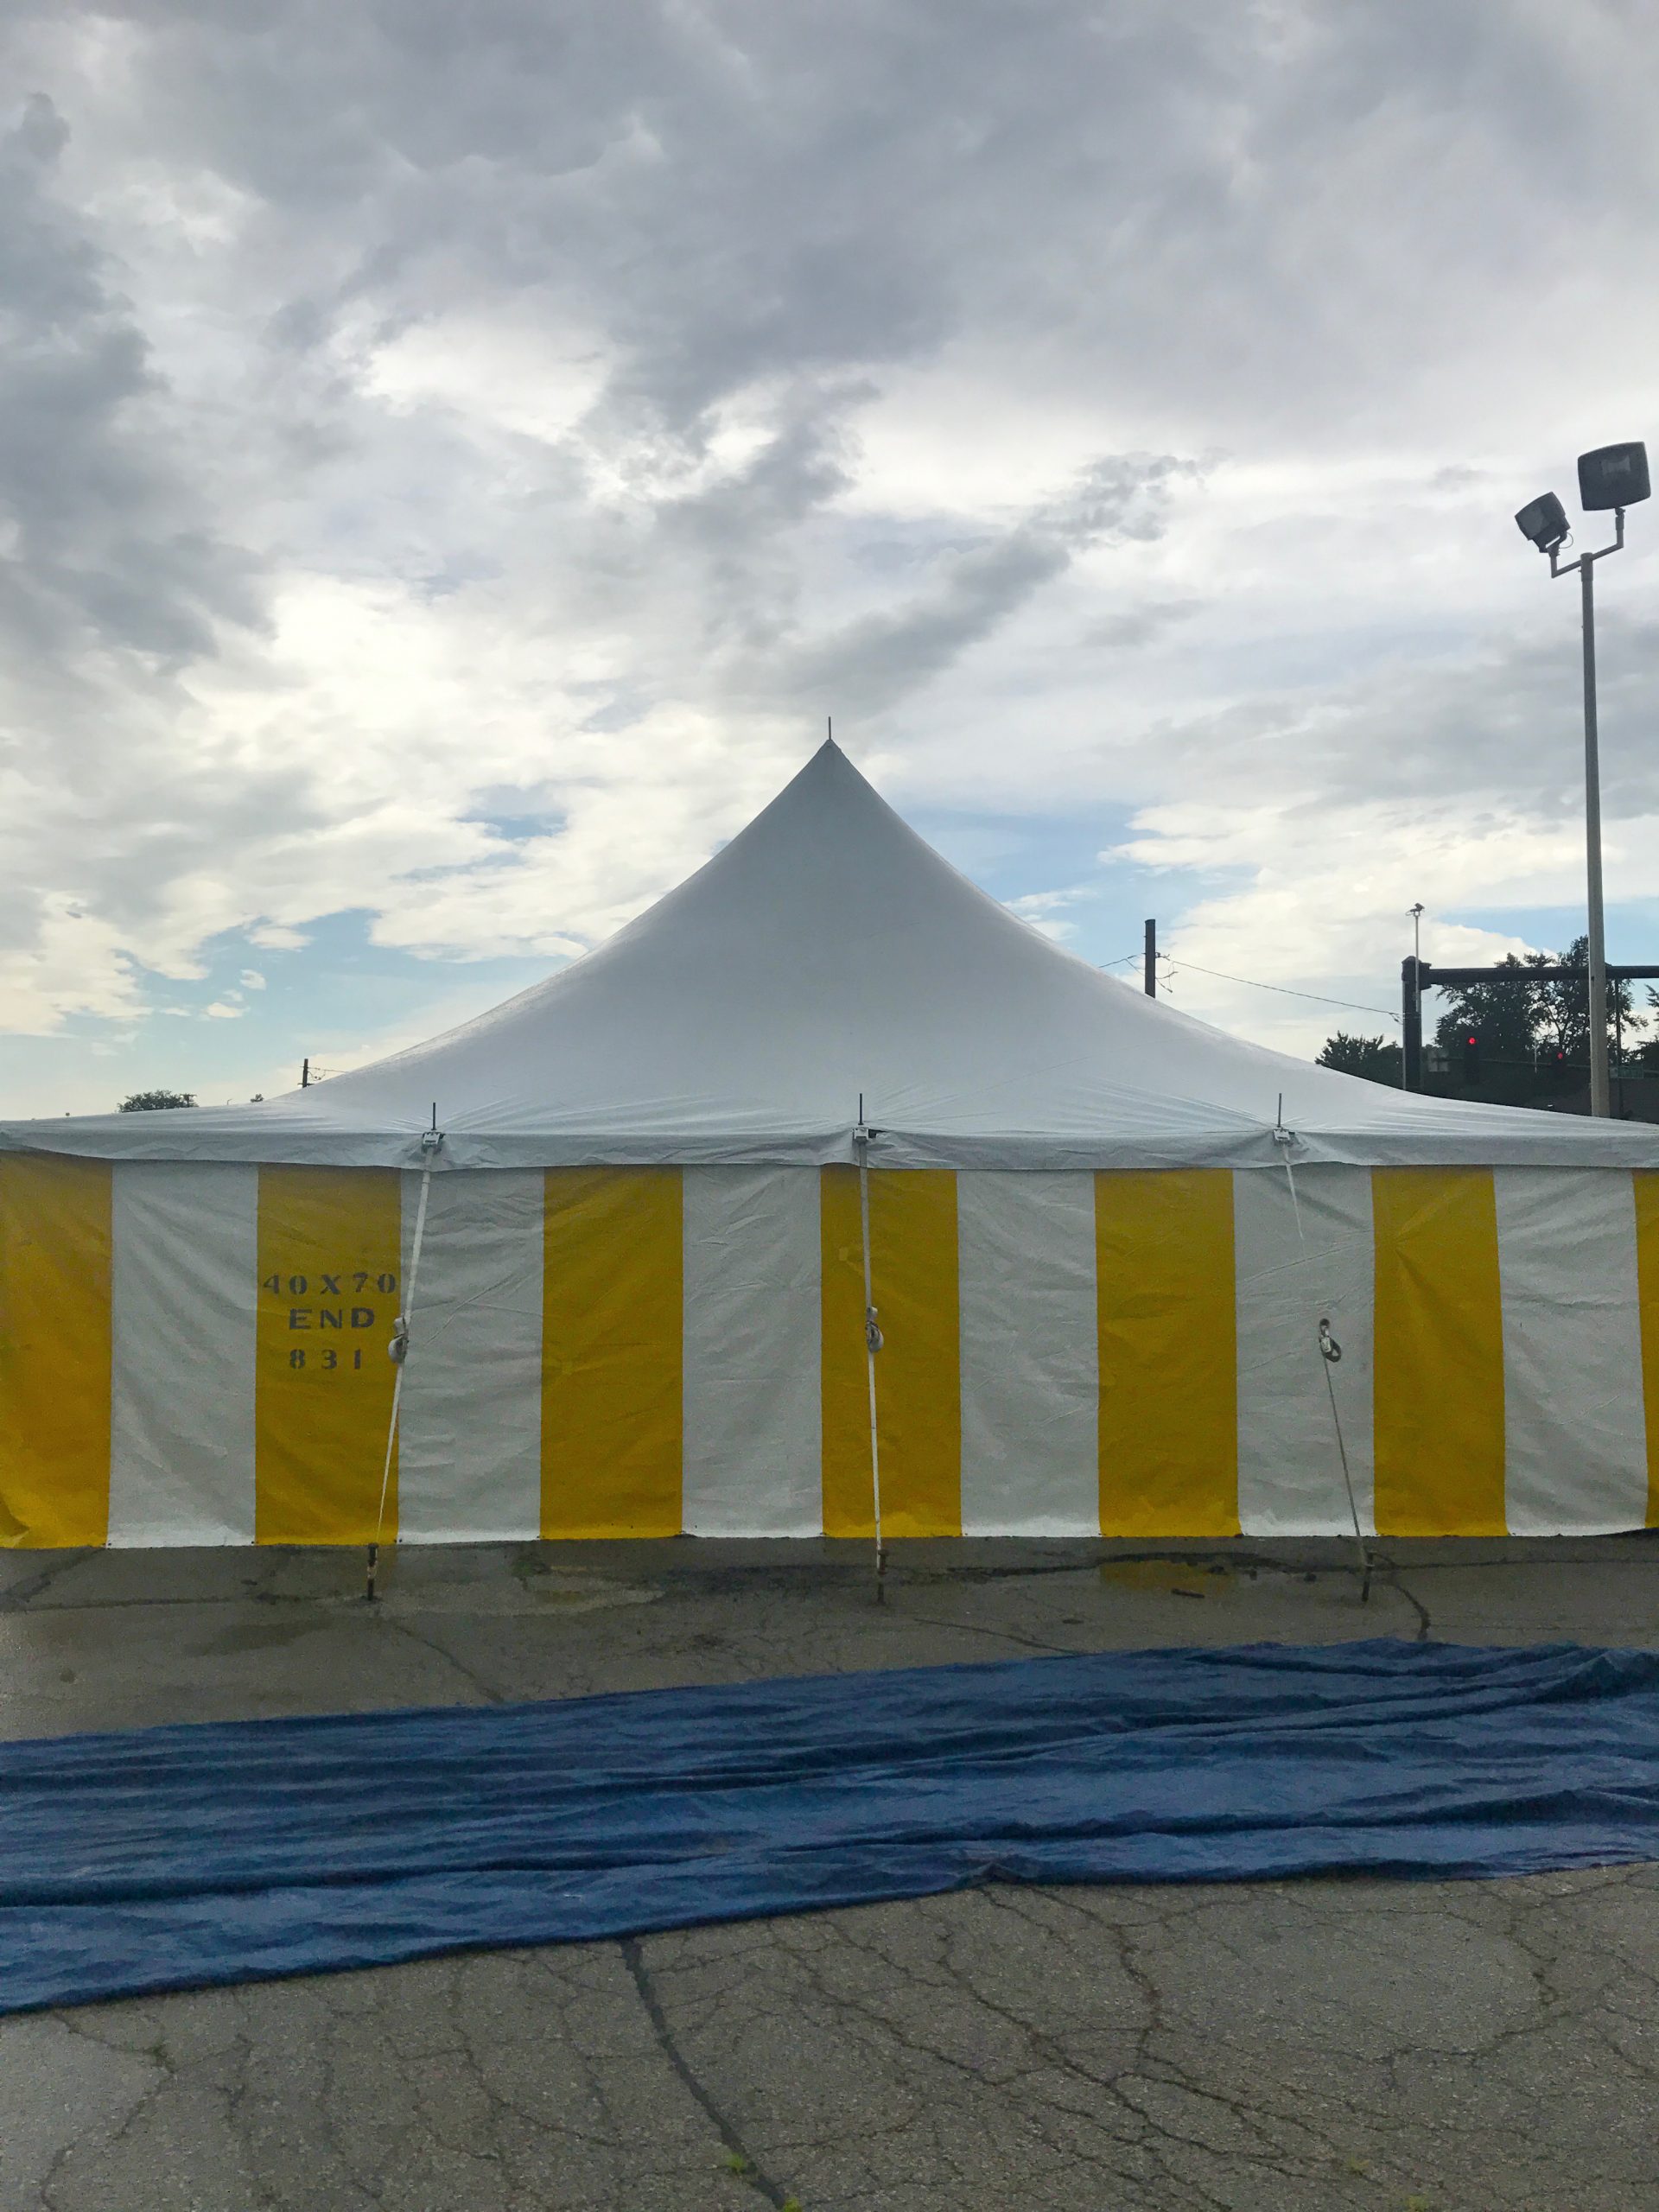 End of 30' x 60' rope and pole tent for Galaxy Fireworks 3801 1st Ave SE, Cedar Rapids, Iowa